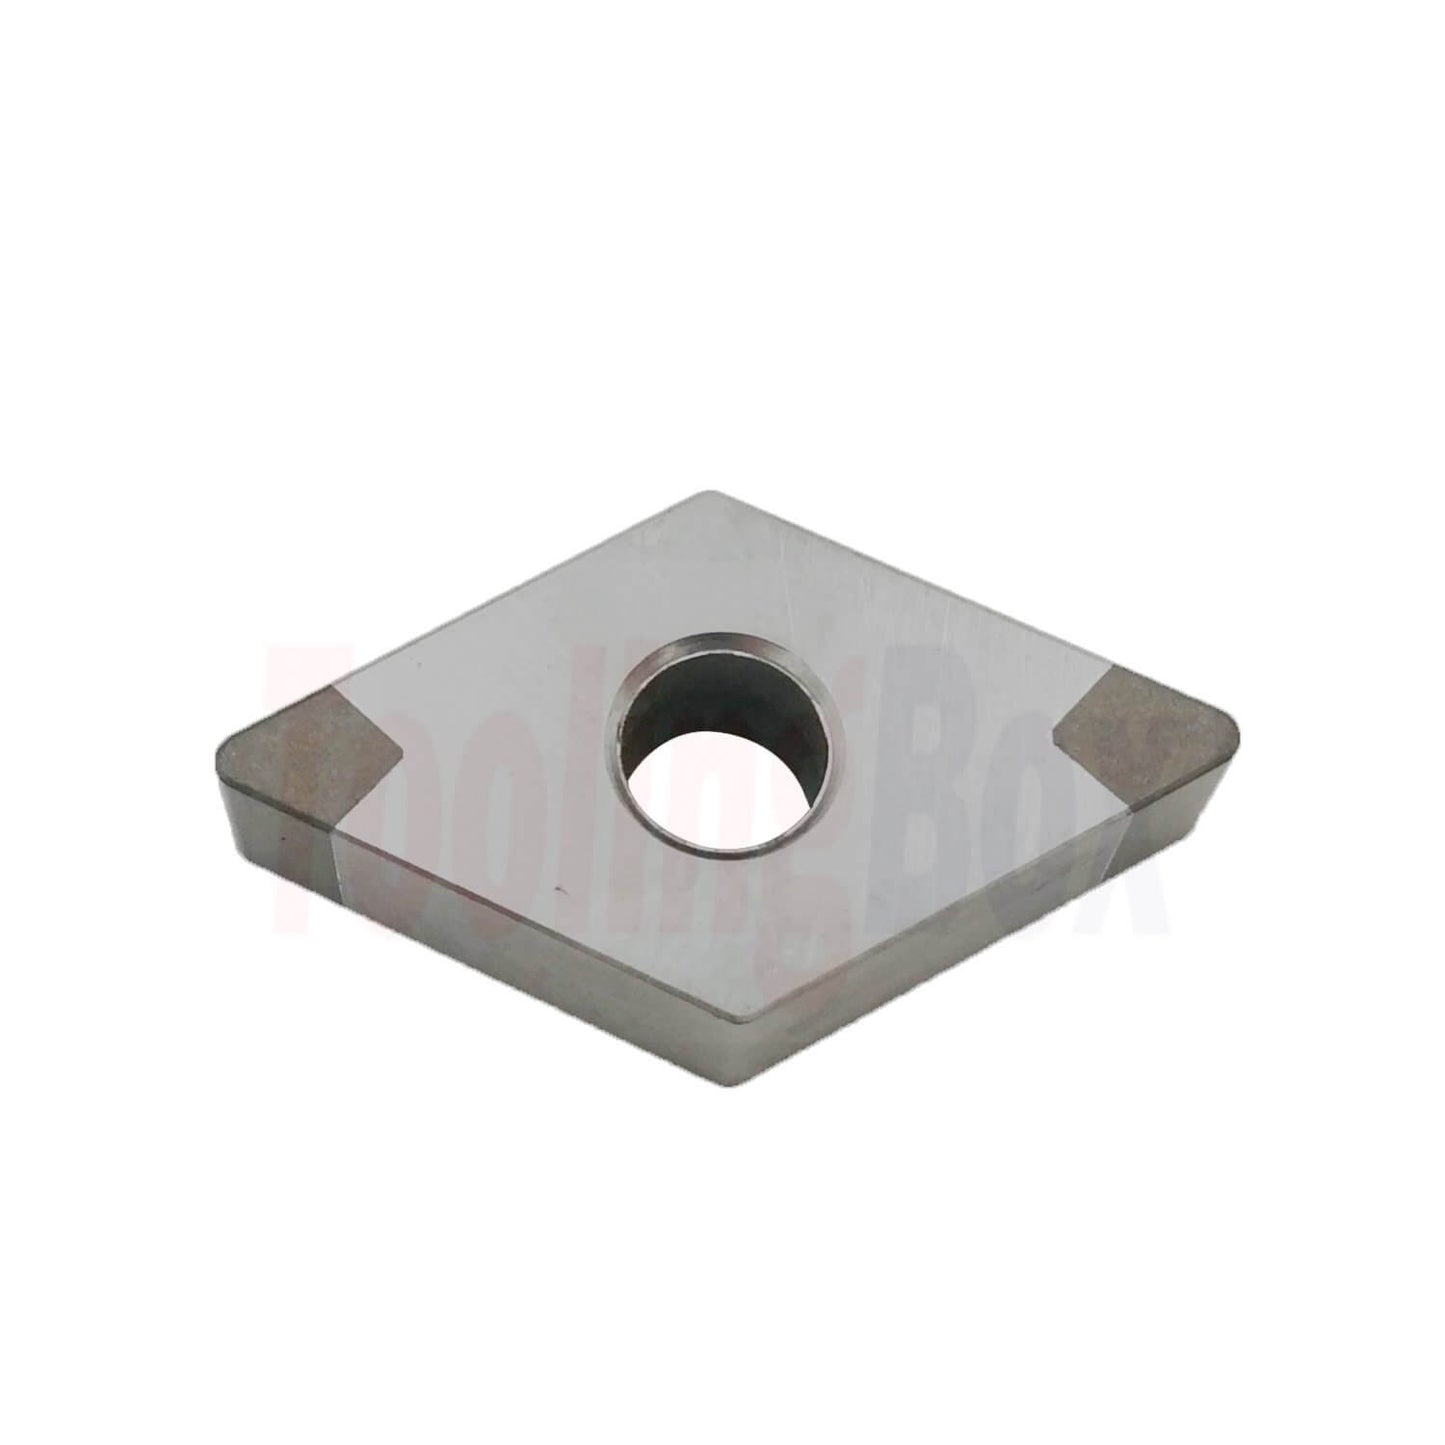 Brazed Solid CBN insert DNMG1504 TB100 with 4 cutting edges